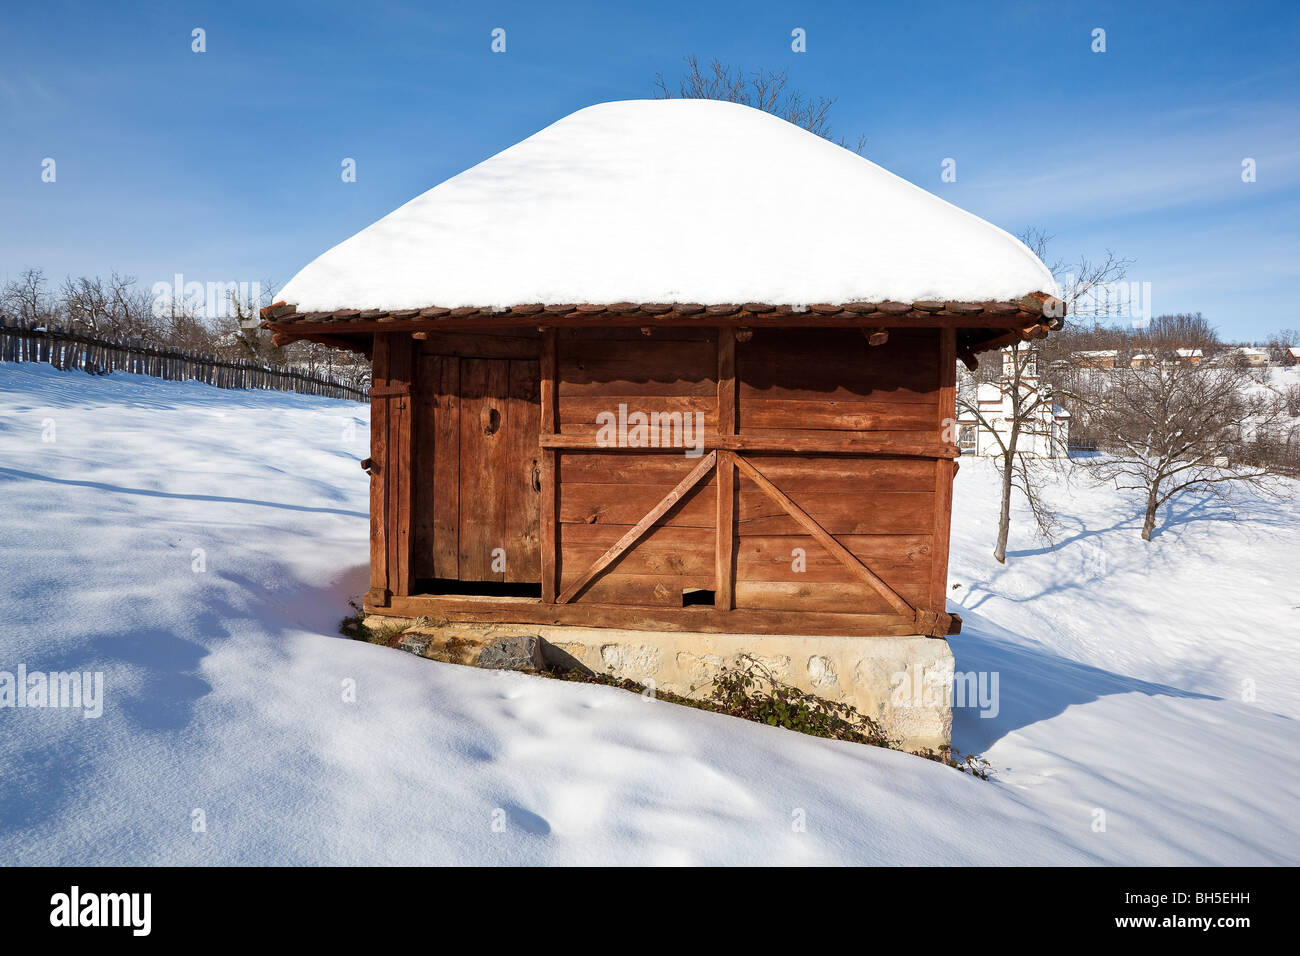 Village Lelic, traditional Serbian economic building "vajat", house, architecture in West Serbia, winter, snow Stock Photo